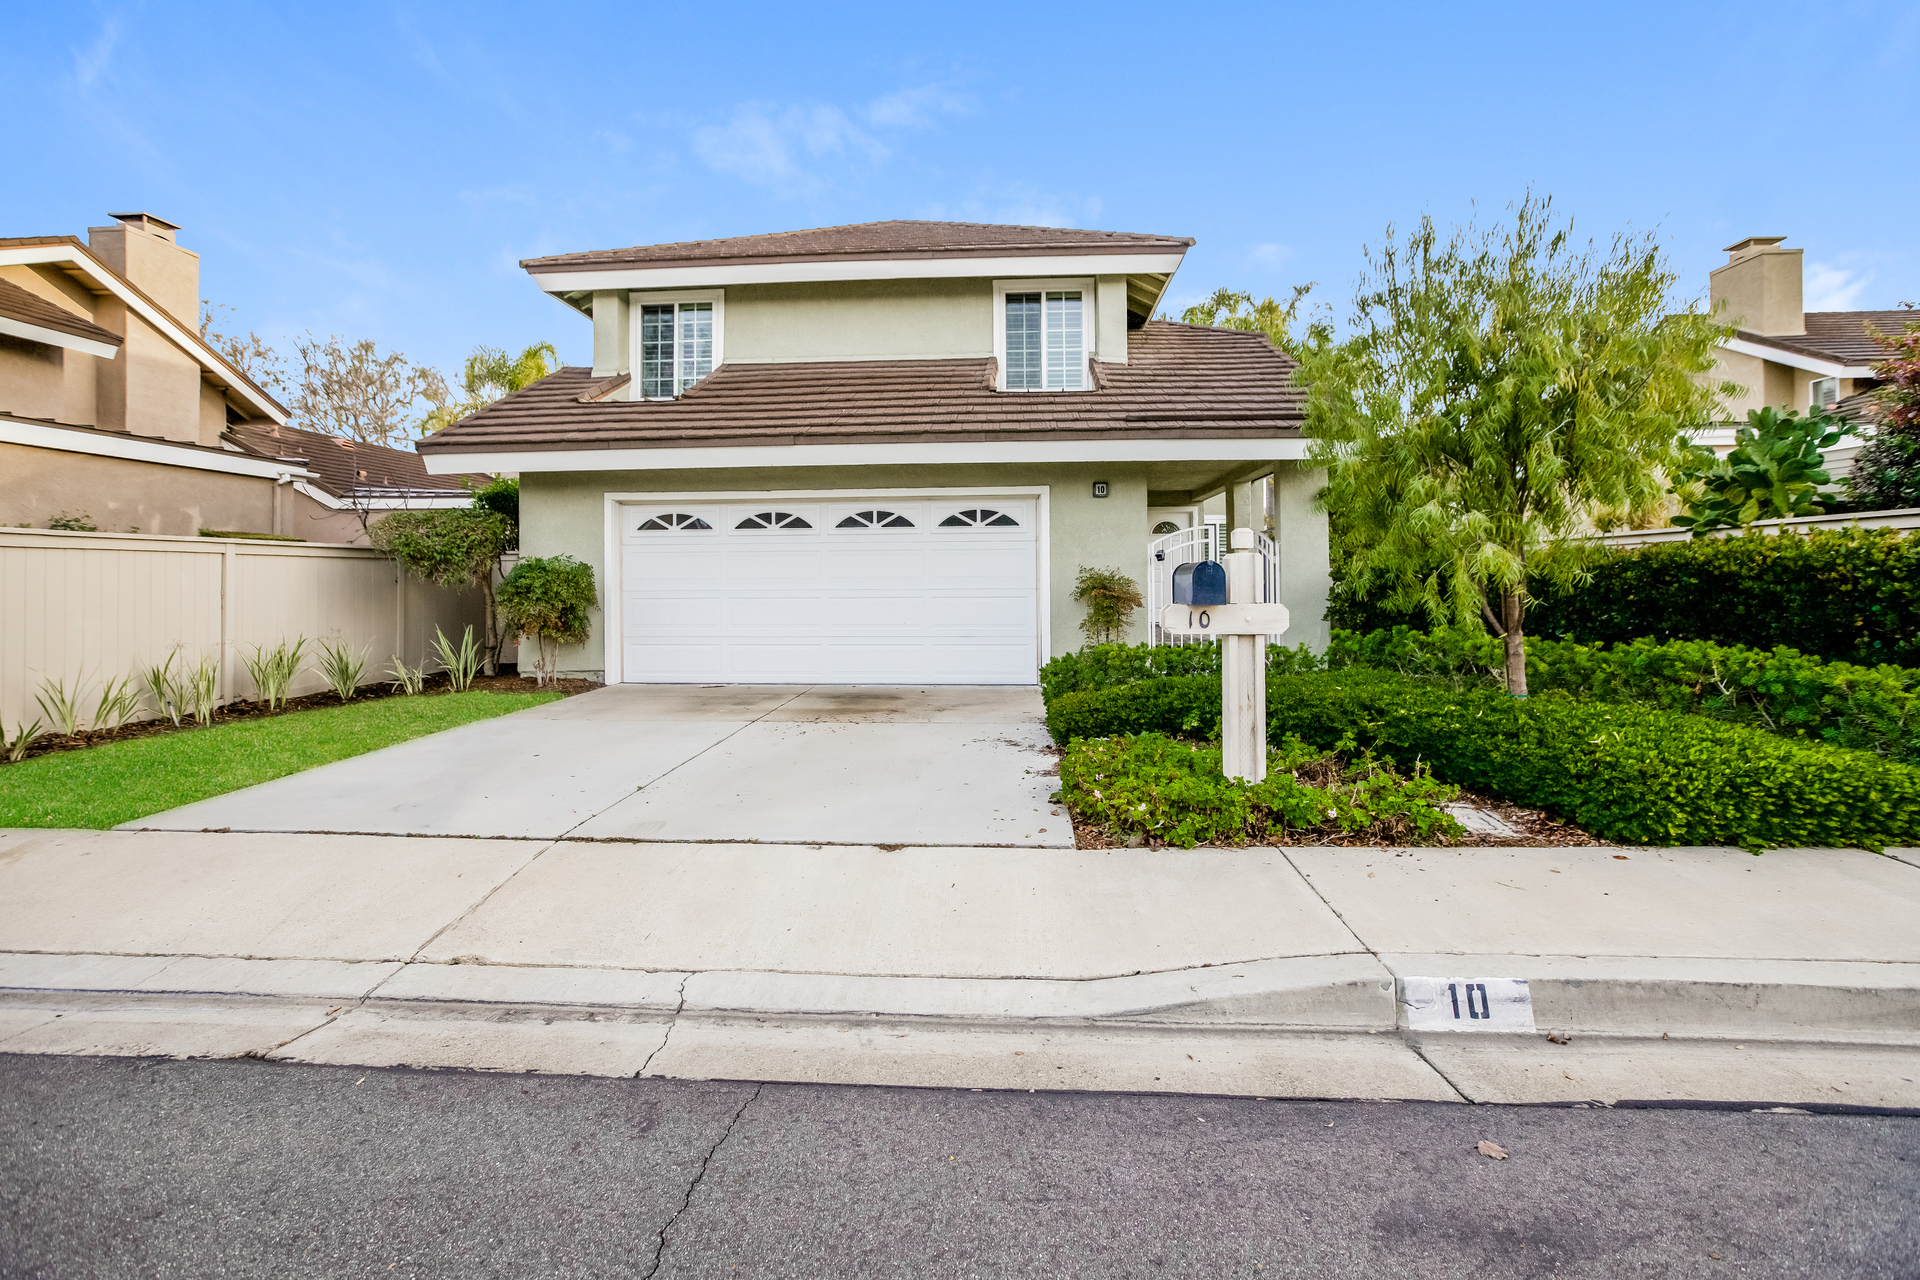 Beautiful Irvine, CA house showcasing the best property management services